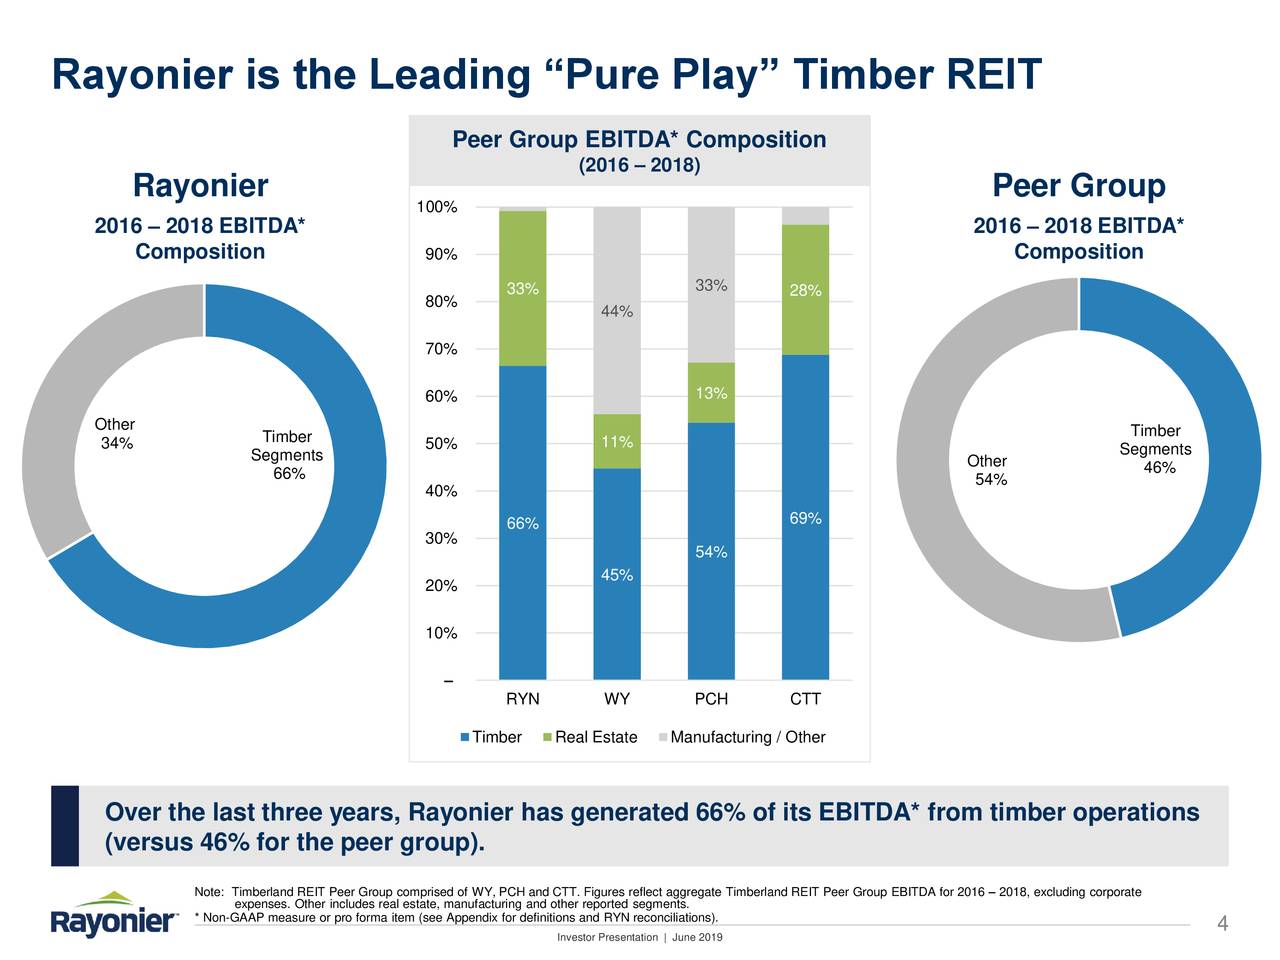 Rayonier is the Leading “Pure Play” Timber REIT